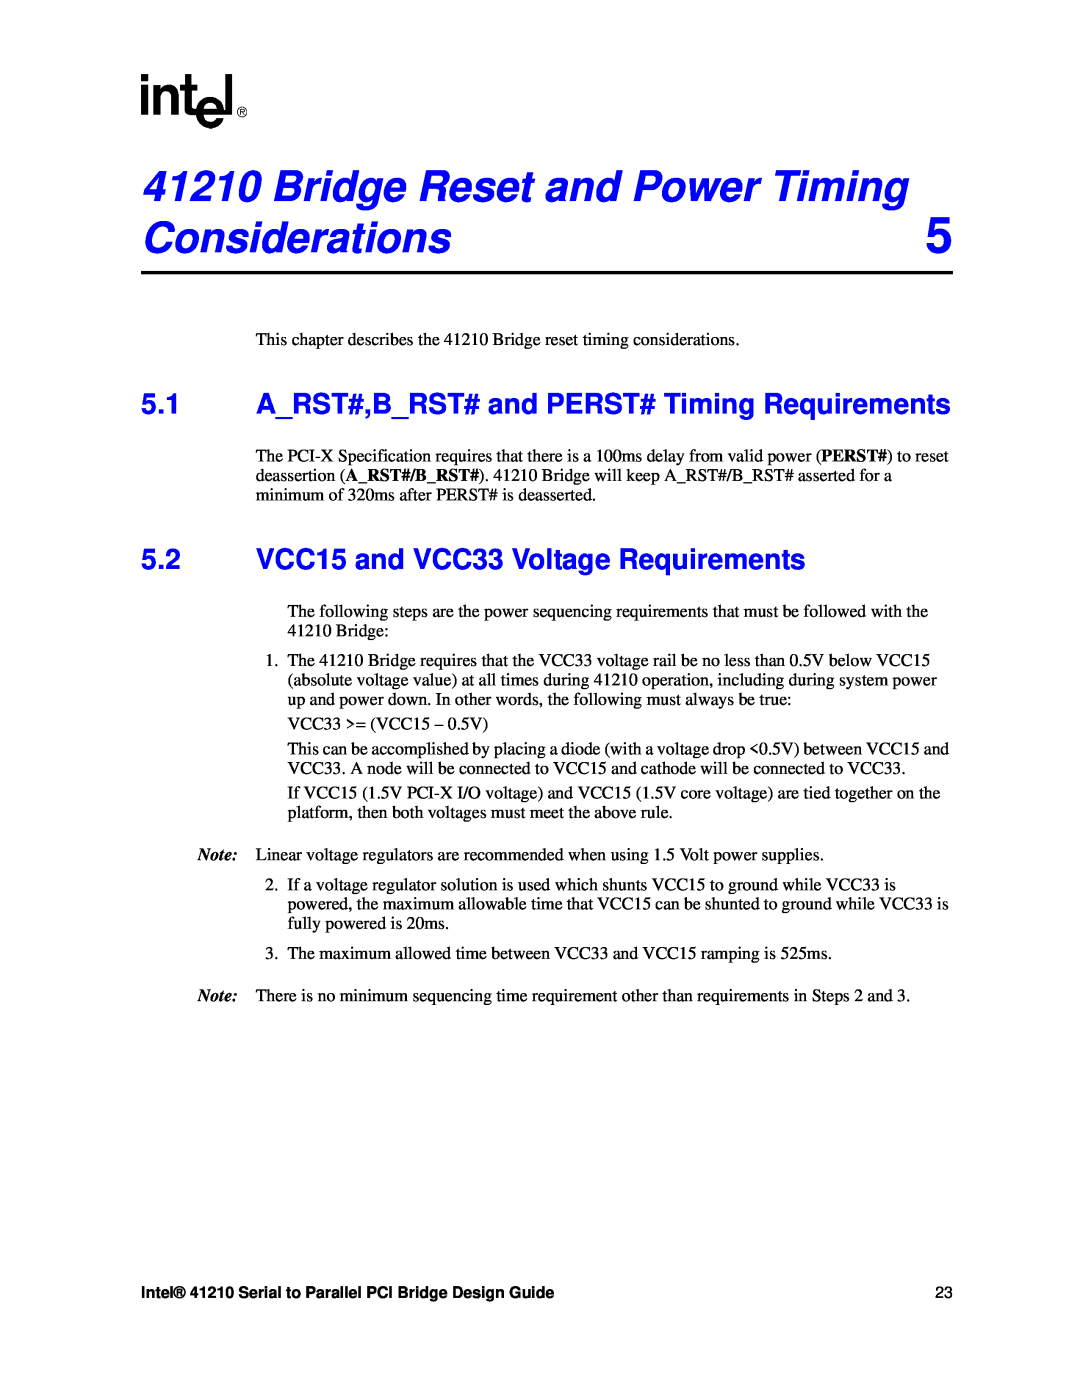 Intel 41210 manual Bridge Reset and Power Timing Considerations5, ARST#,BRST# and PERST# Timing Requirements 